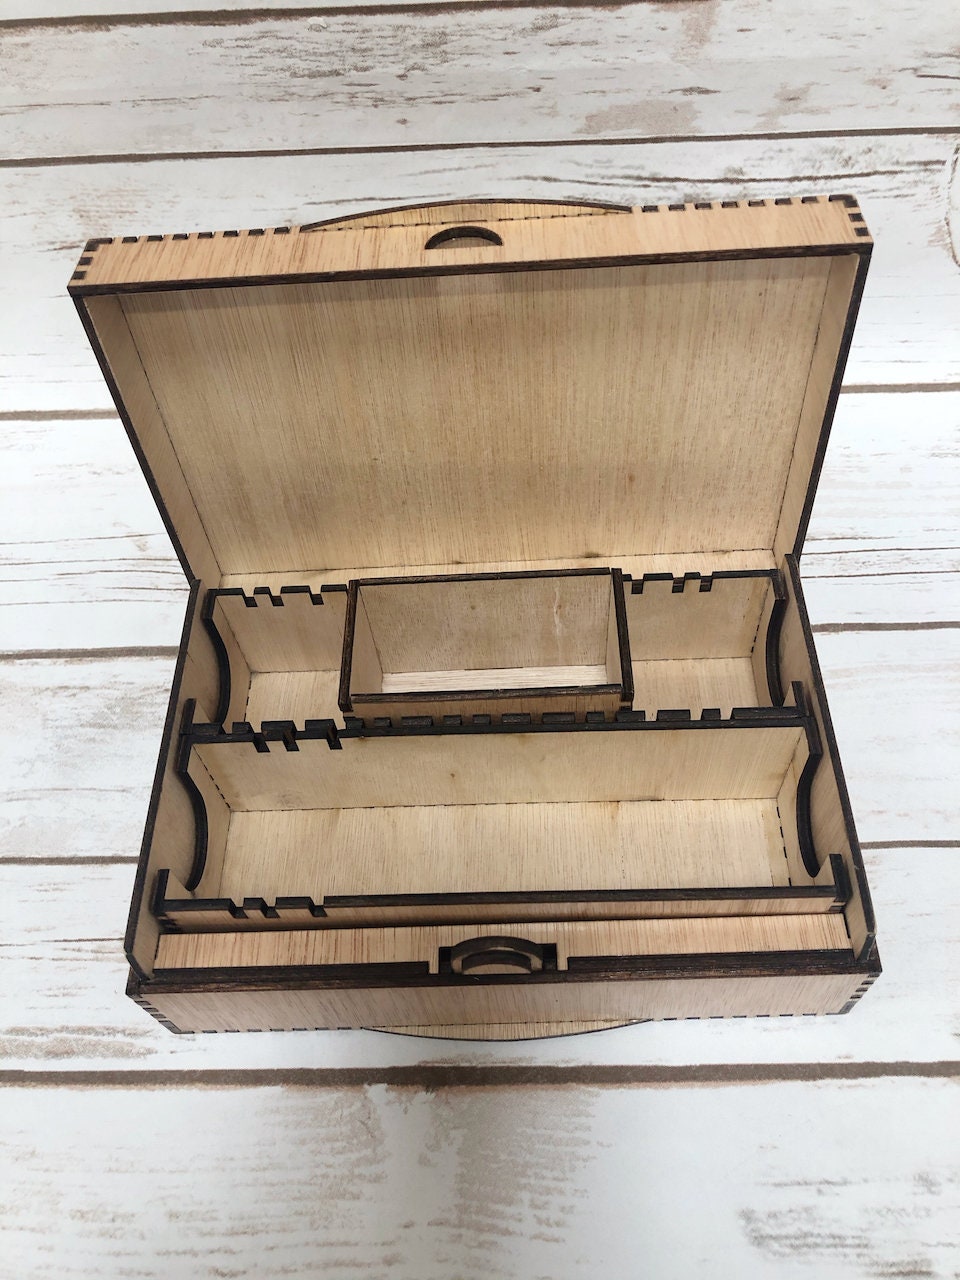 Carcassonne Travel Box w meeple box for those with BW Storage box already! 